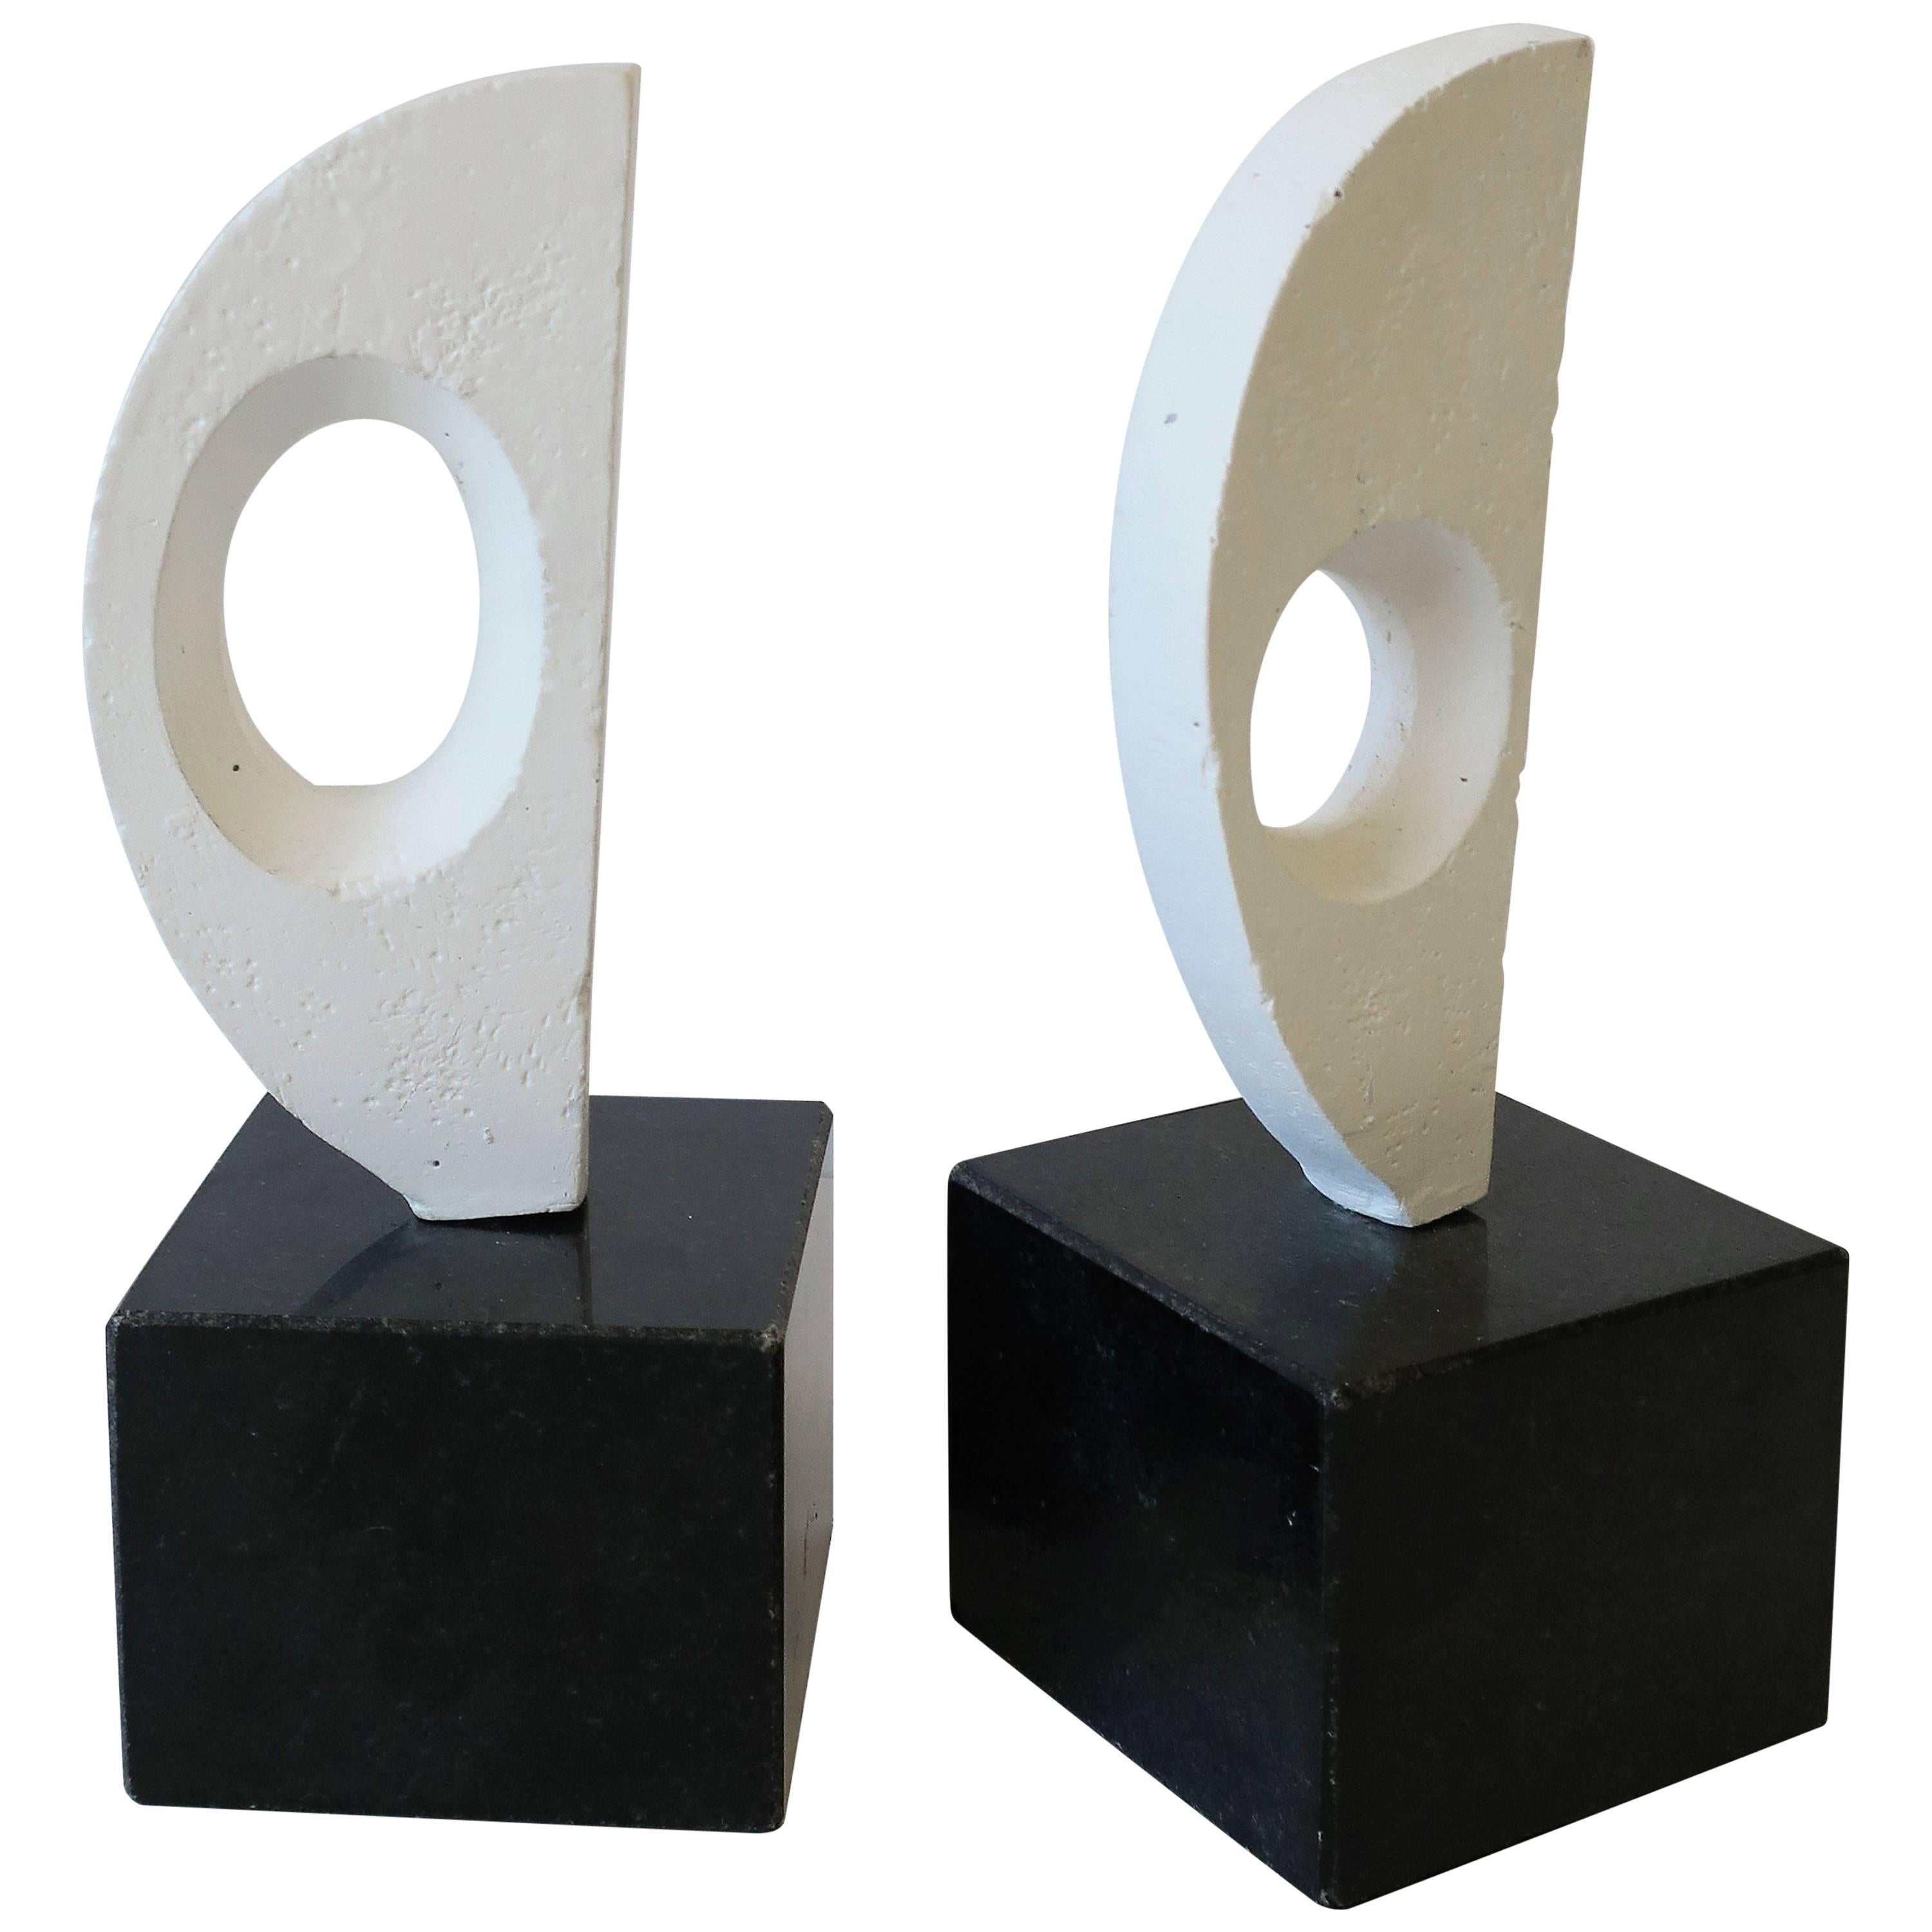 Pair of Black and White Abstract Sculpture Bookends on Marble Bases